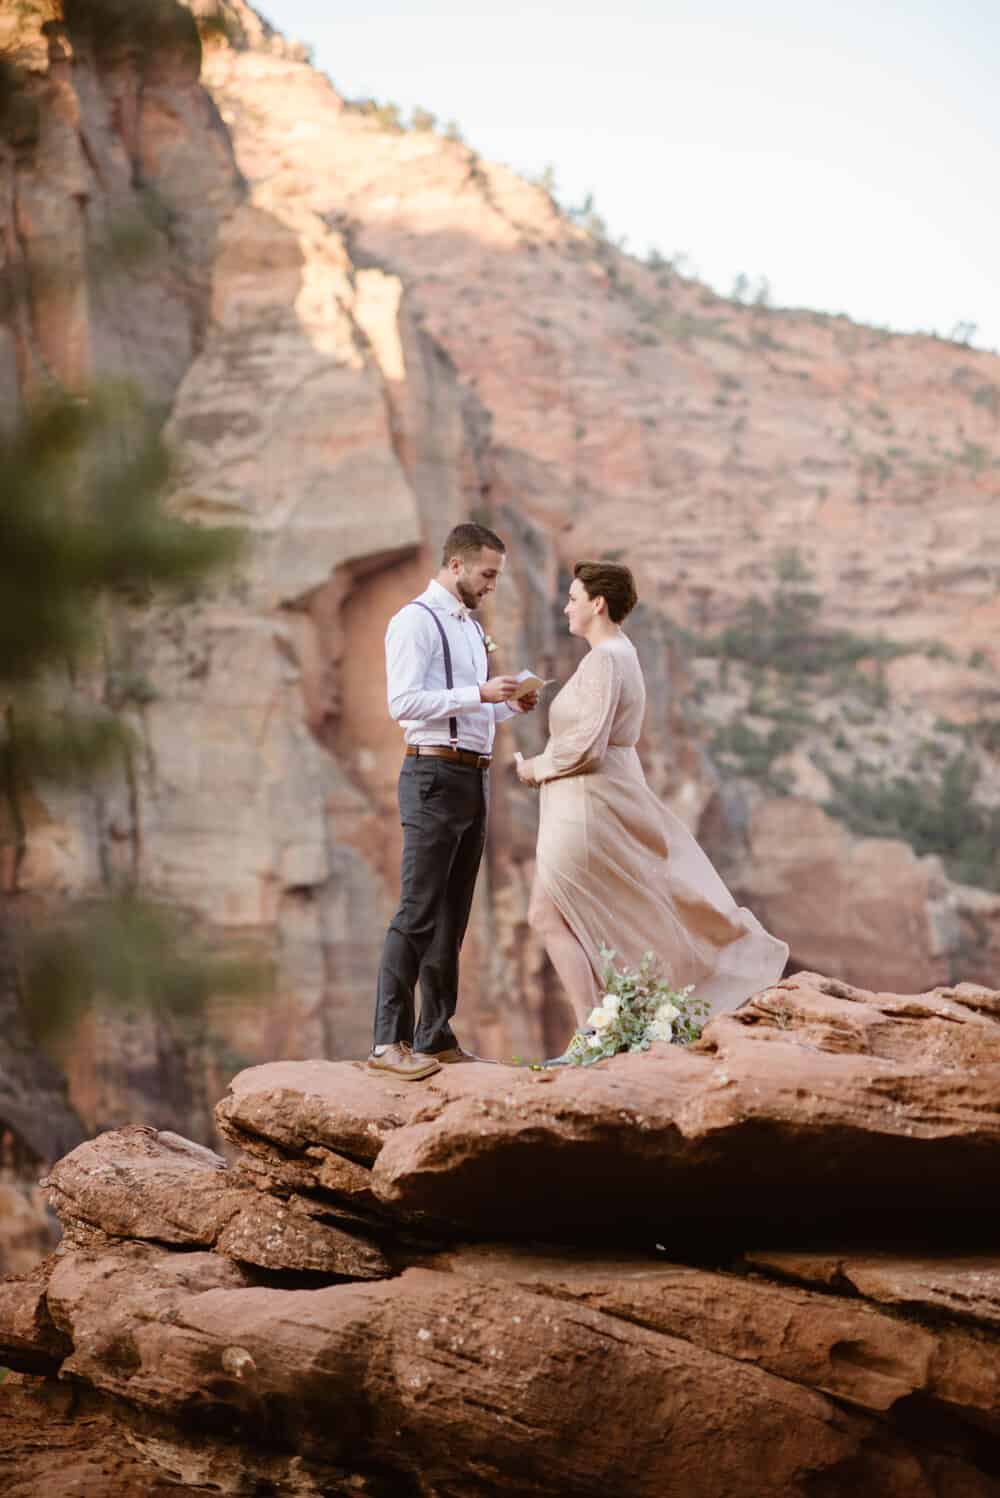 The bride and groom share vows with one another at a private vista overlook within Zion National Park